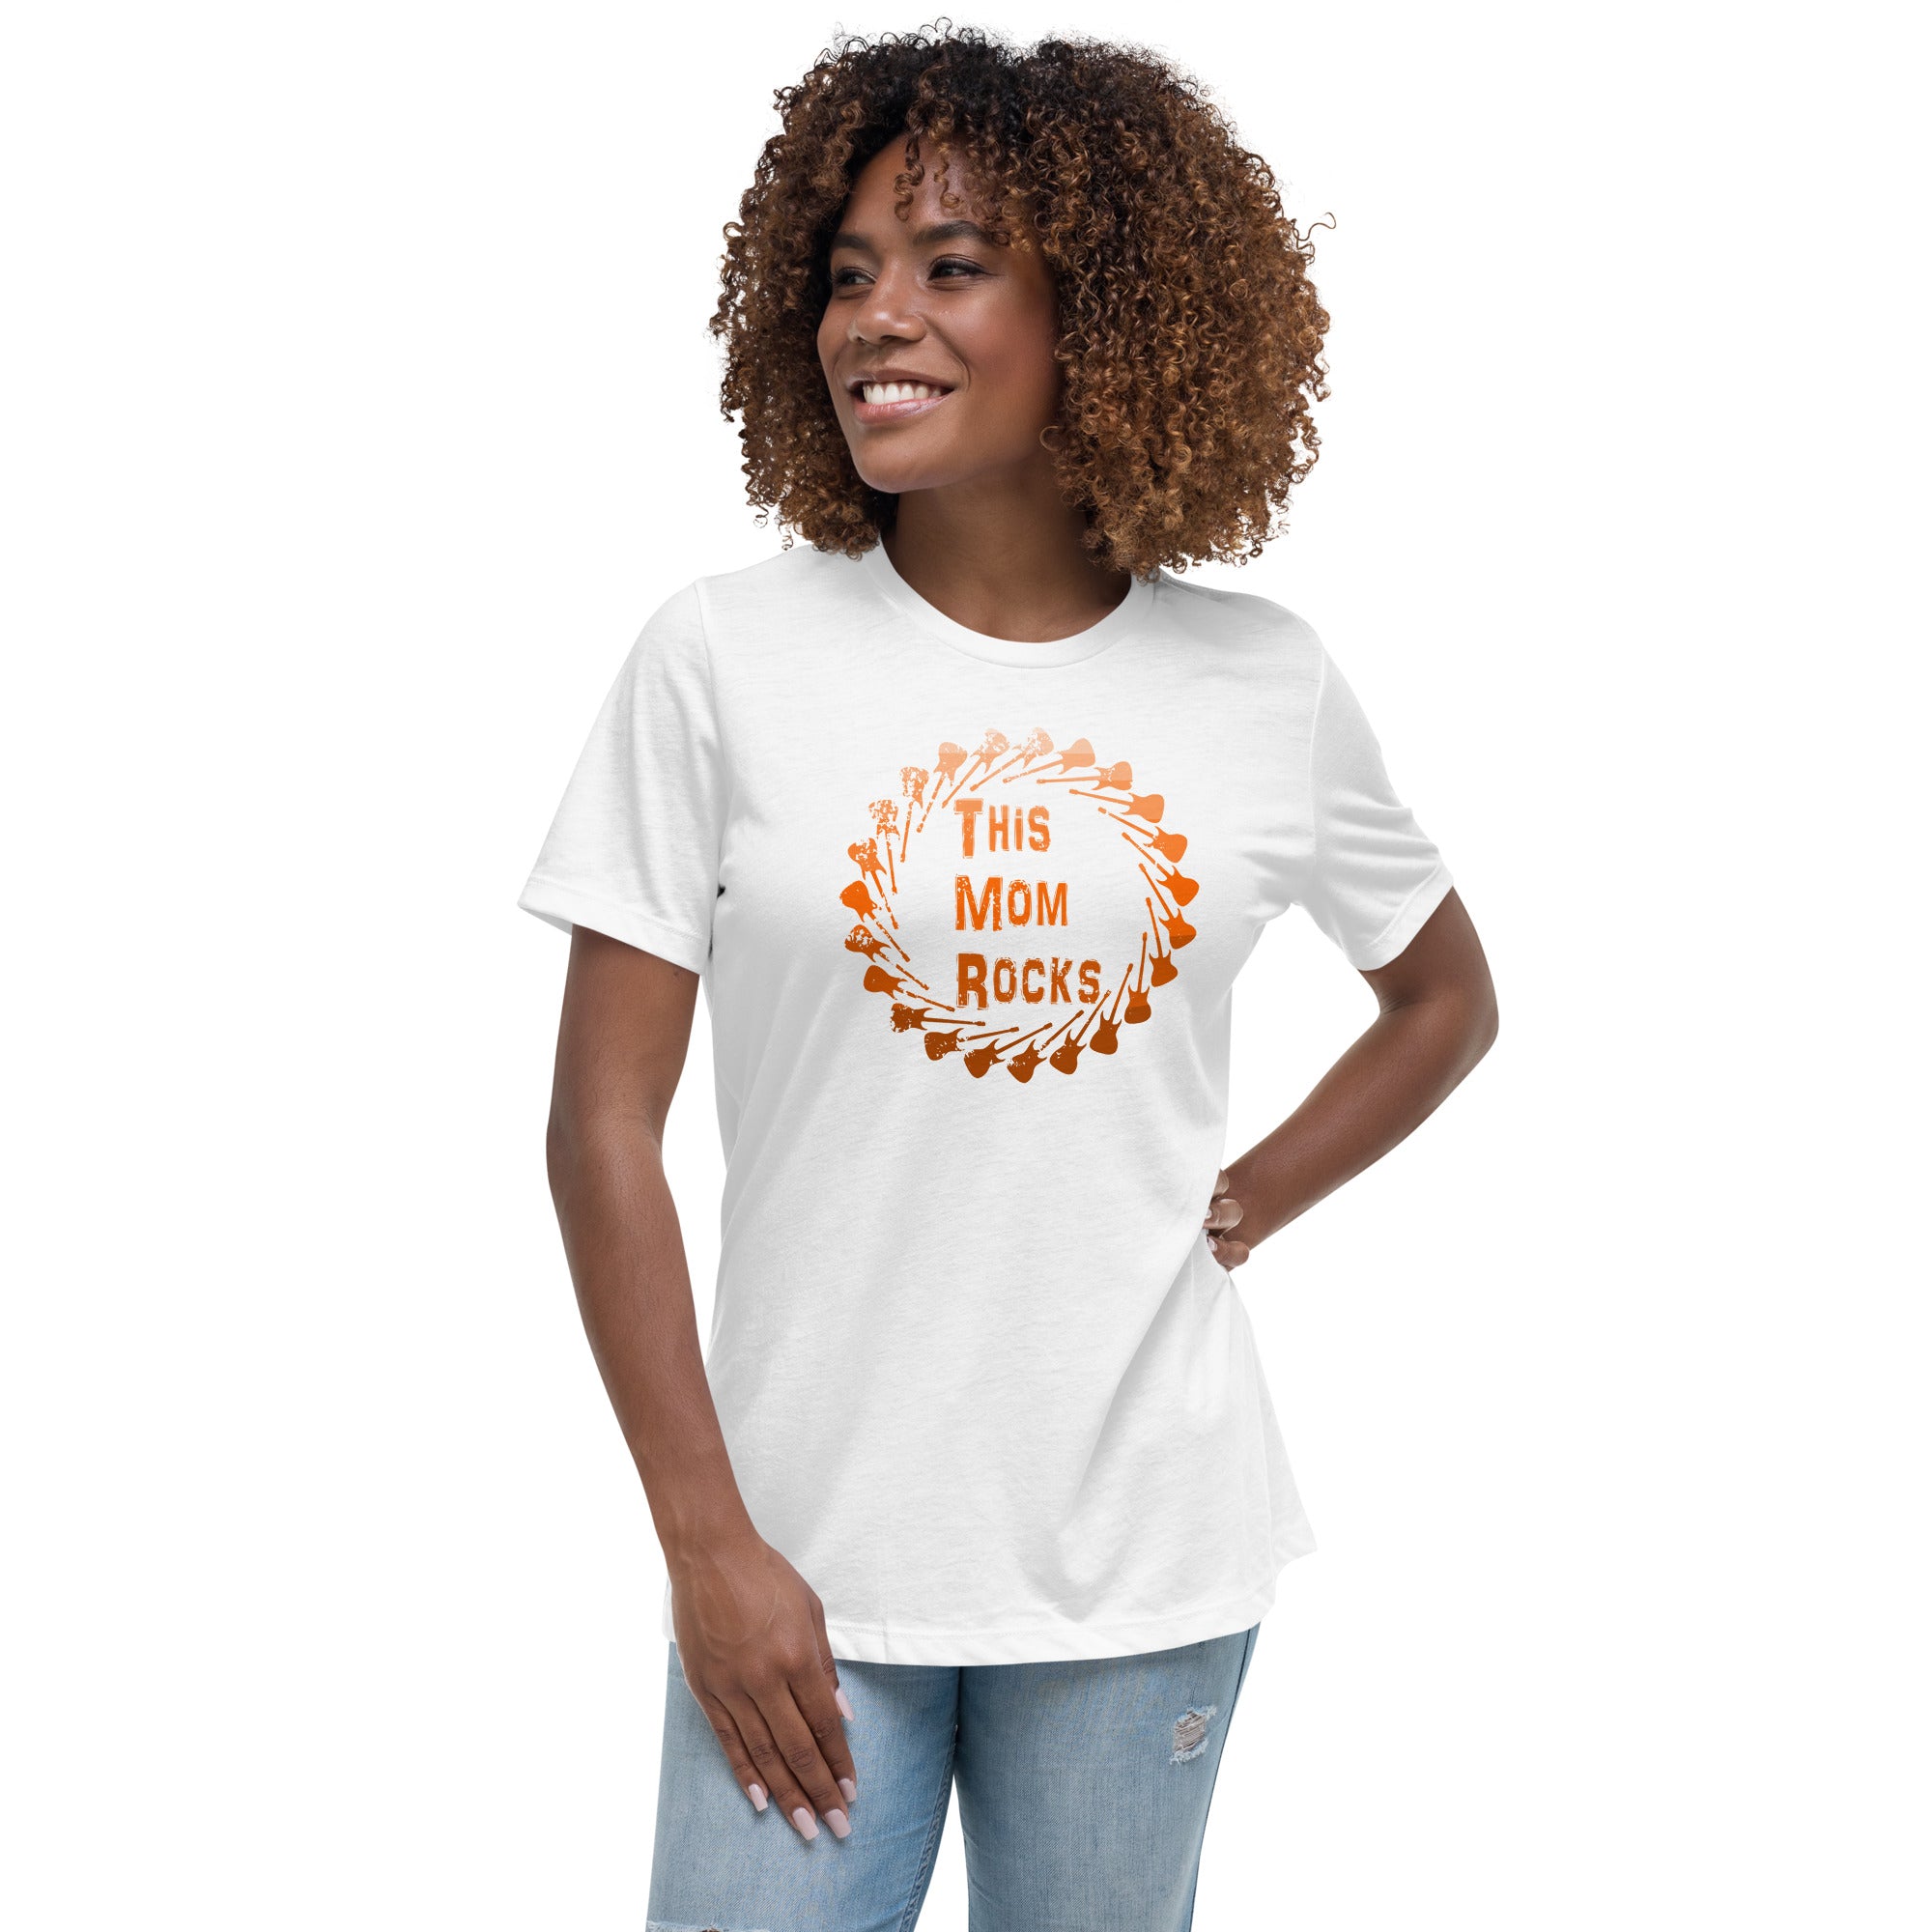 Vintage 'This Mom Rocks' Tee - Perfect Mother's Day Gift for Music-Loving Moms - Unique Circle of Guitars Design for a Nostalgic Vibe